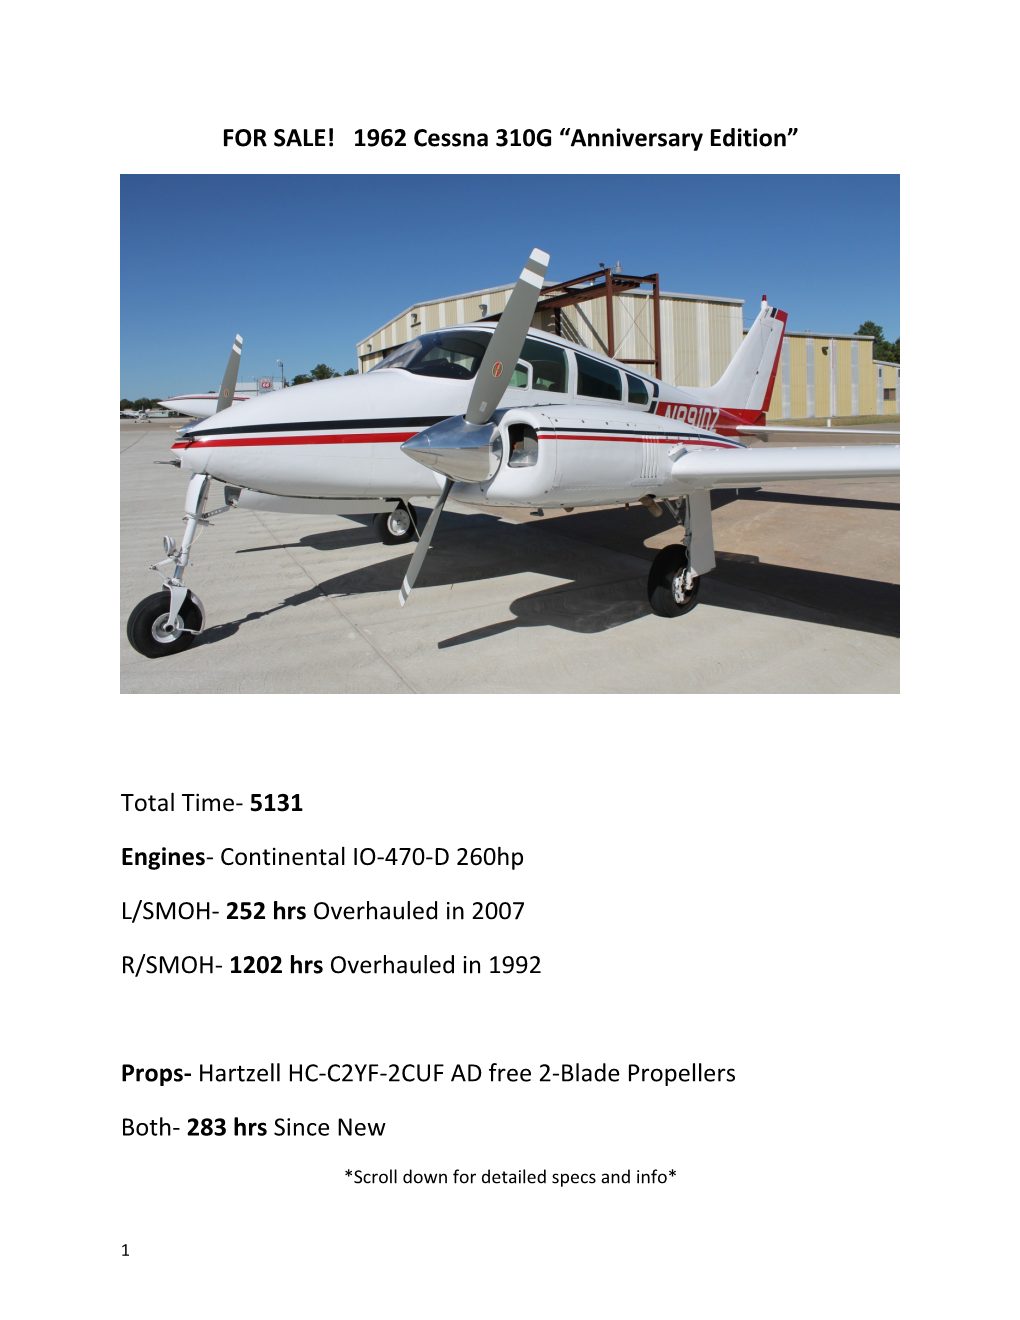 FOR SALE! 1962 Cessna 310G Anniversary Edition